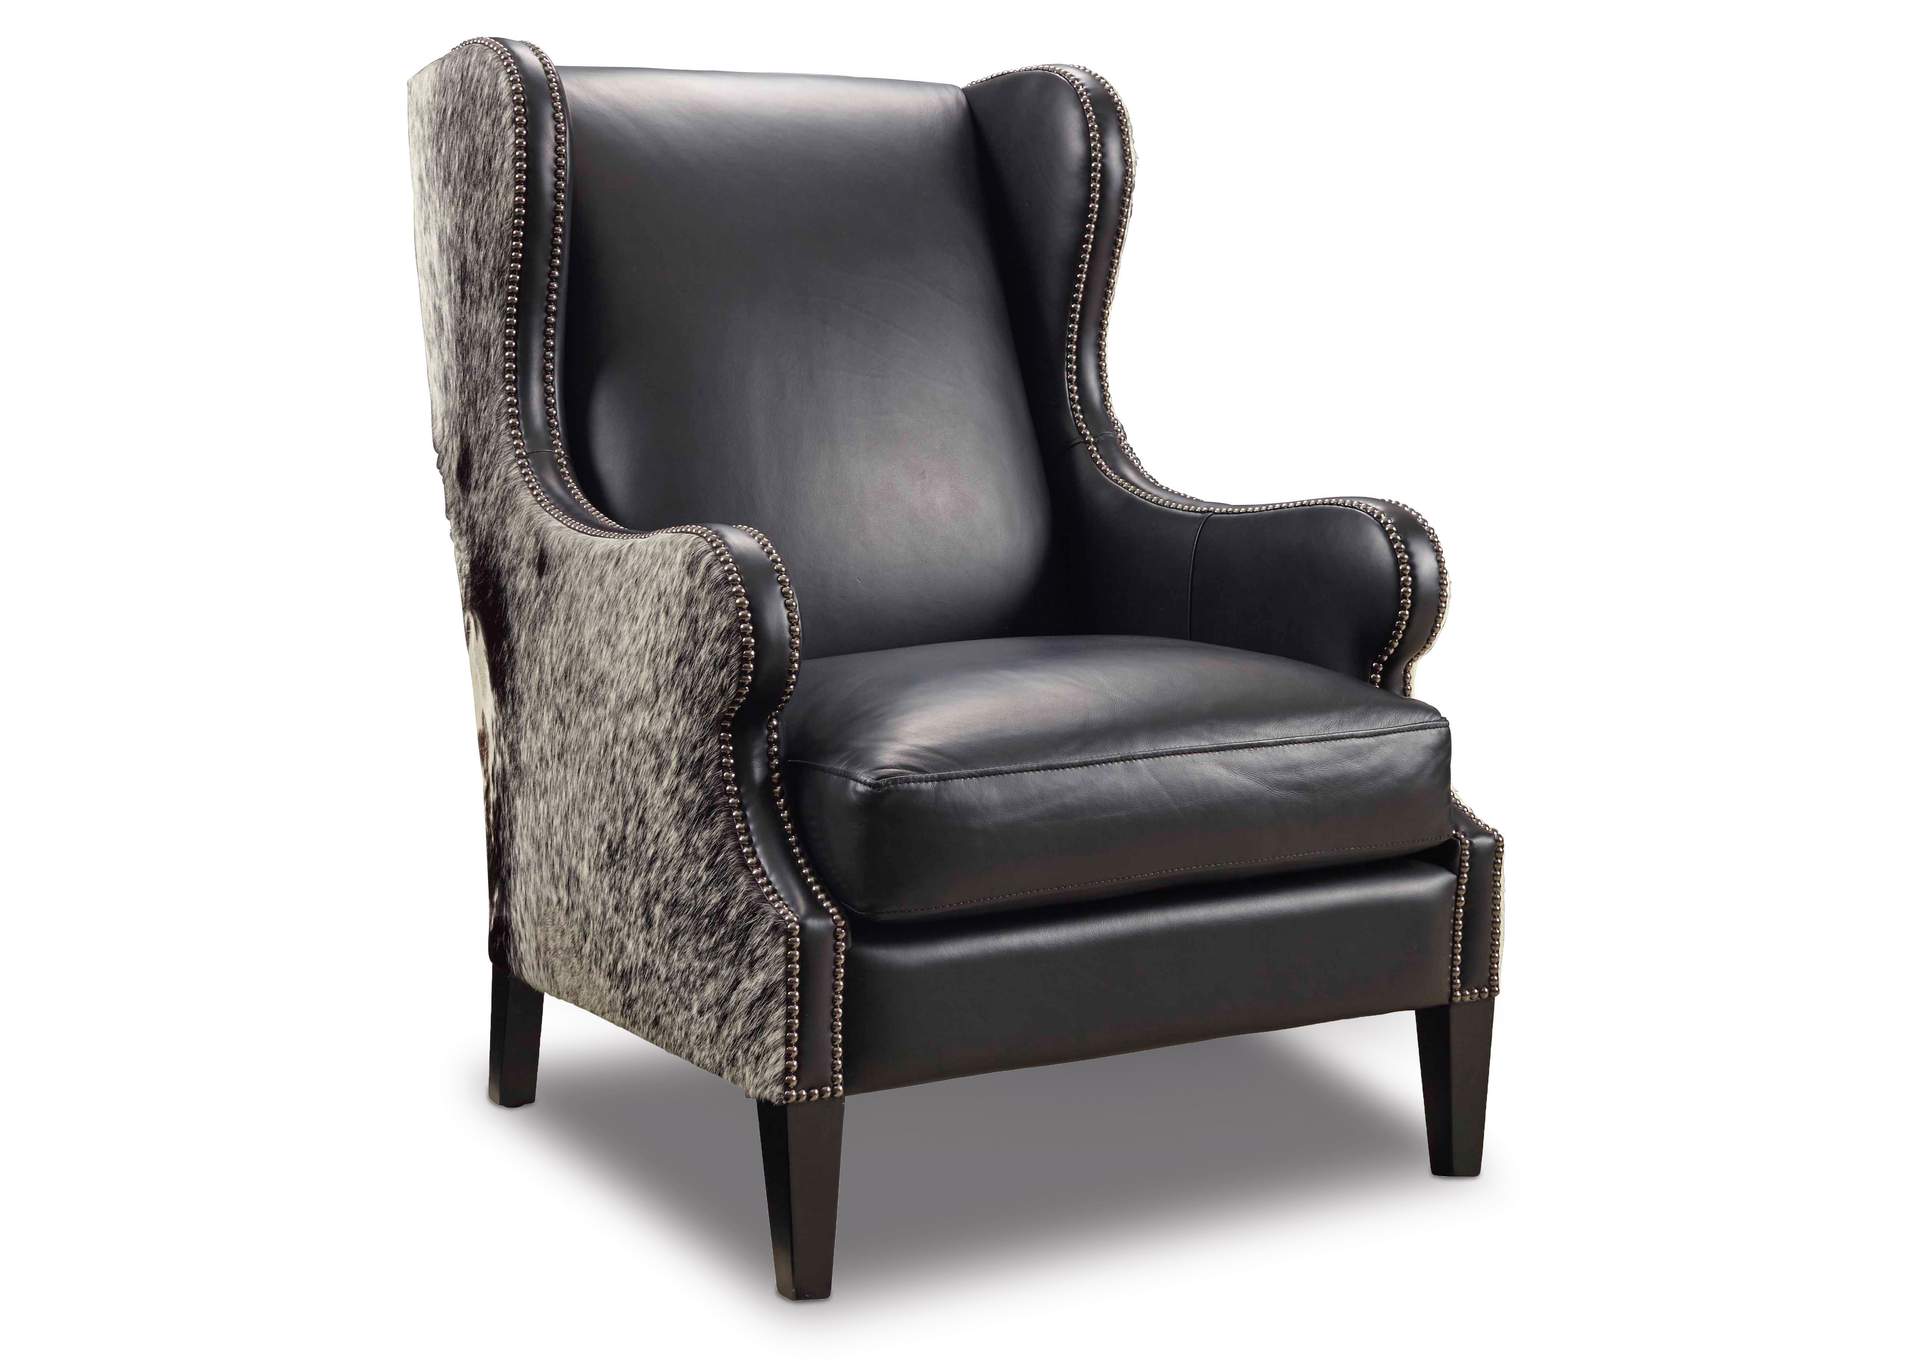 Lily Club Chair,Hooker Furniture